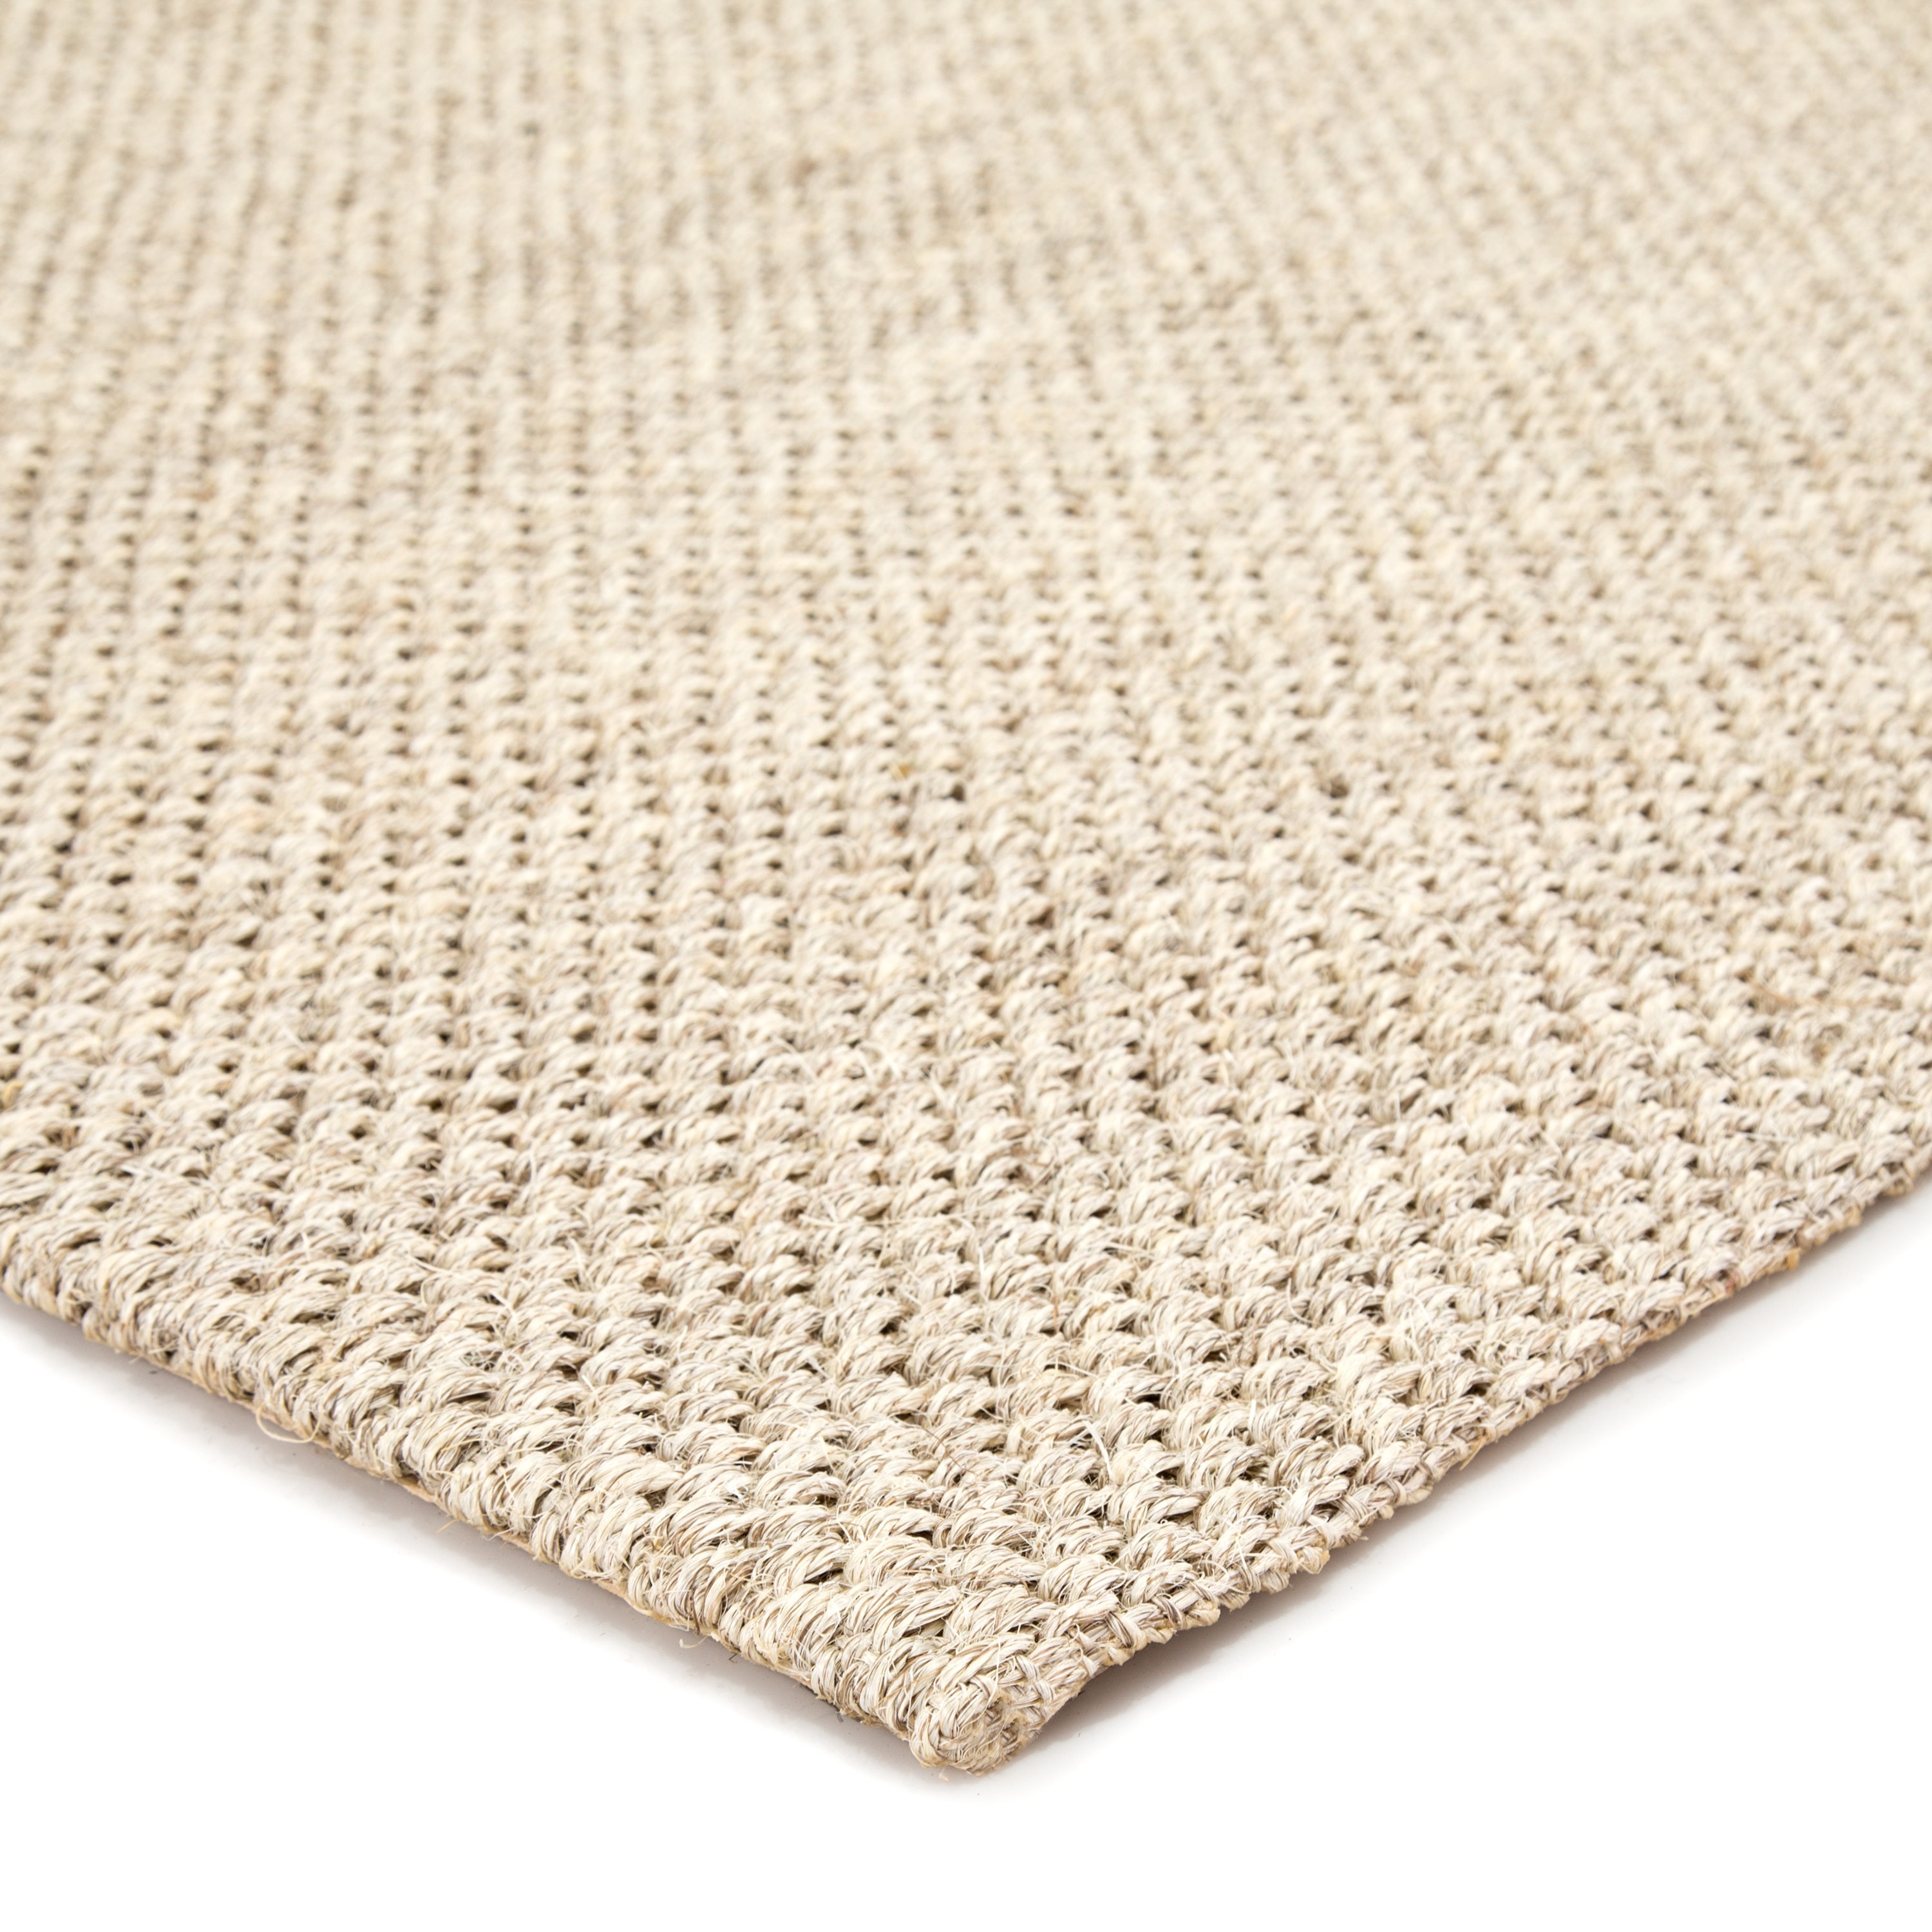 Naples Natural Solid White/ Taupe Area Rug (9'6" X 13'6") - Image 1